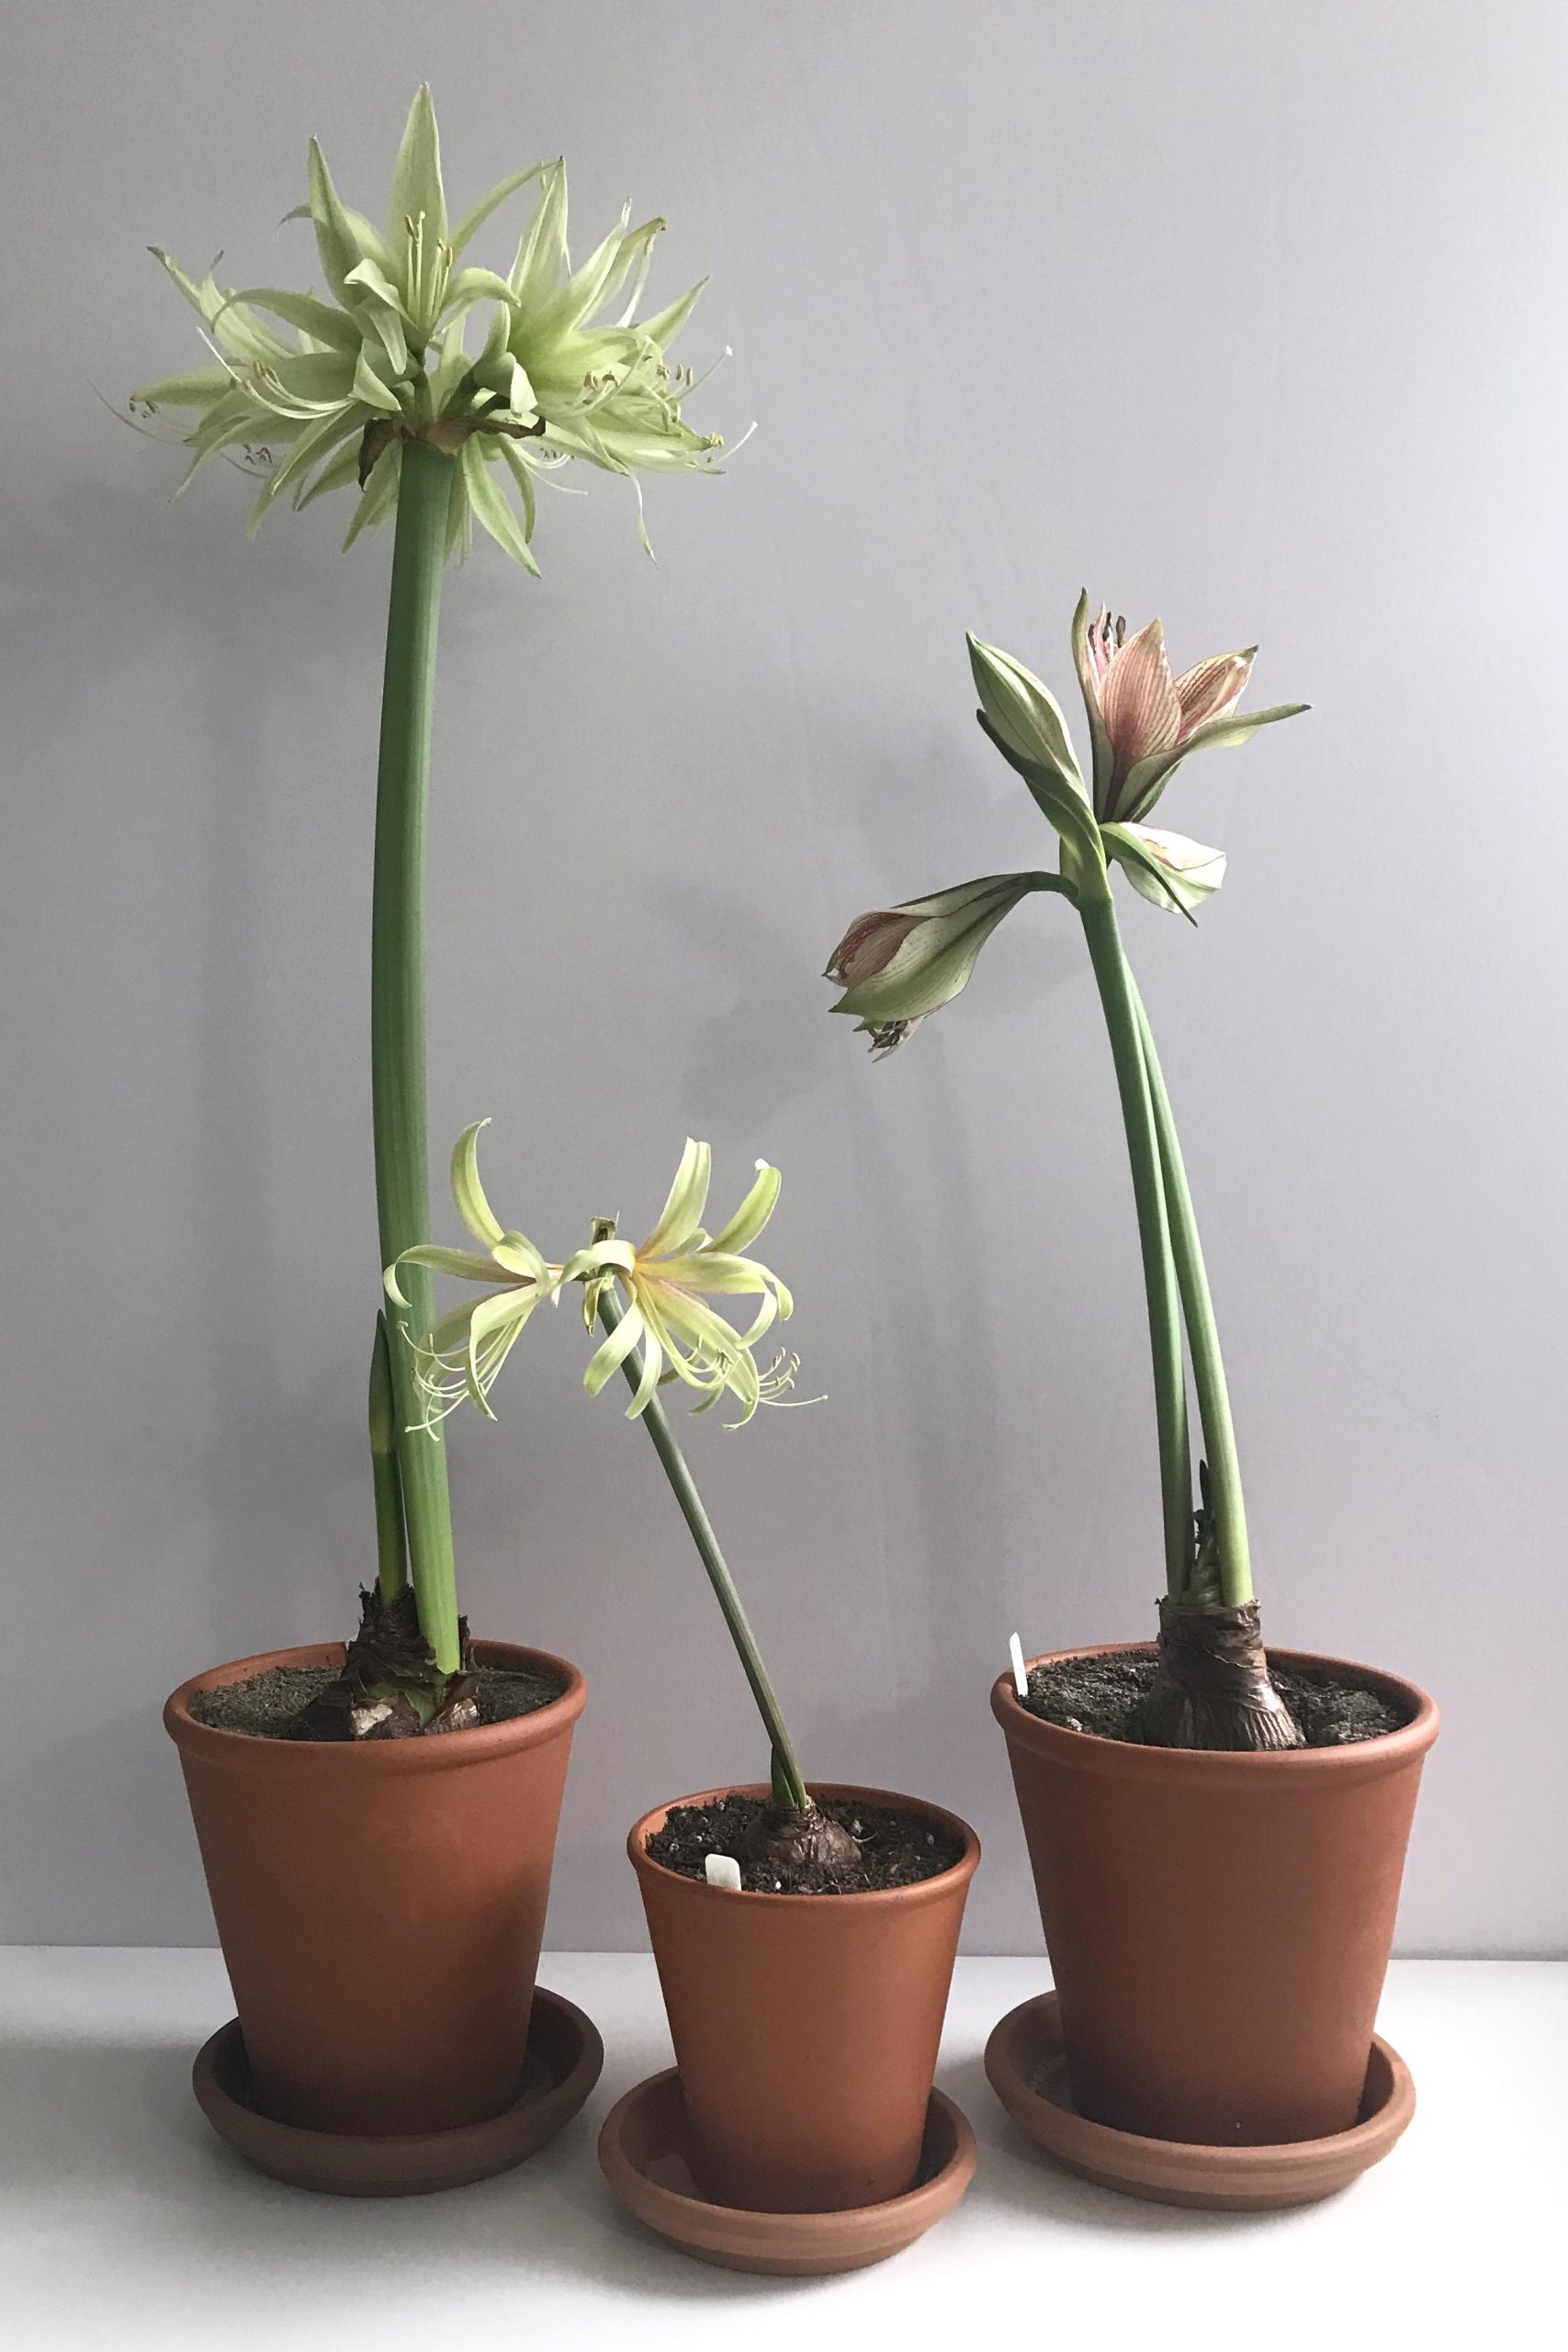 Potted amaryllis (Hippeastrum) 'Evergreen' (cybister type, in bloom), 'Saffron' (miniature sonatini, in bloom), and 'Exotic Star' (perhaps a papilio hybrid, buds beginning to open) on a white desk in Wraptillion's studio.